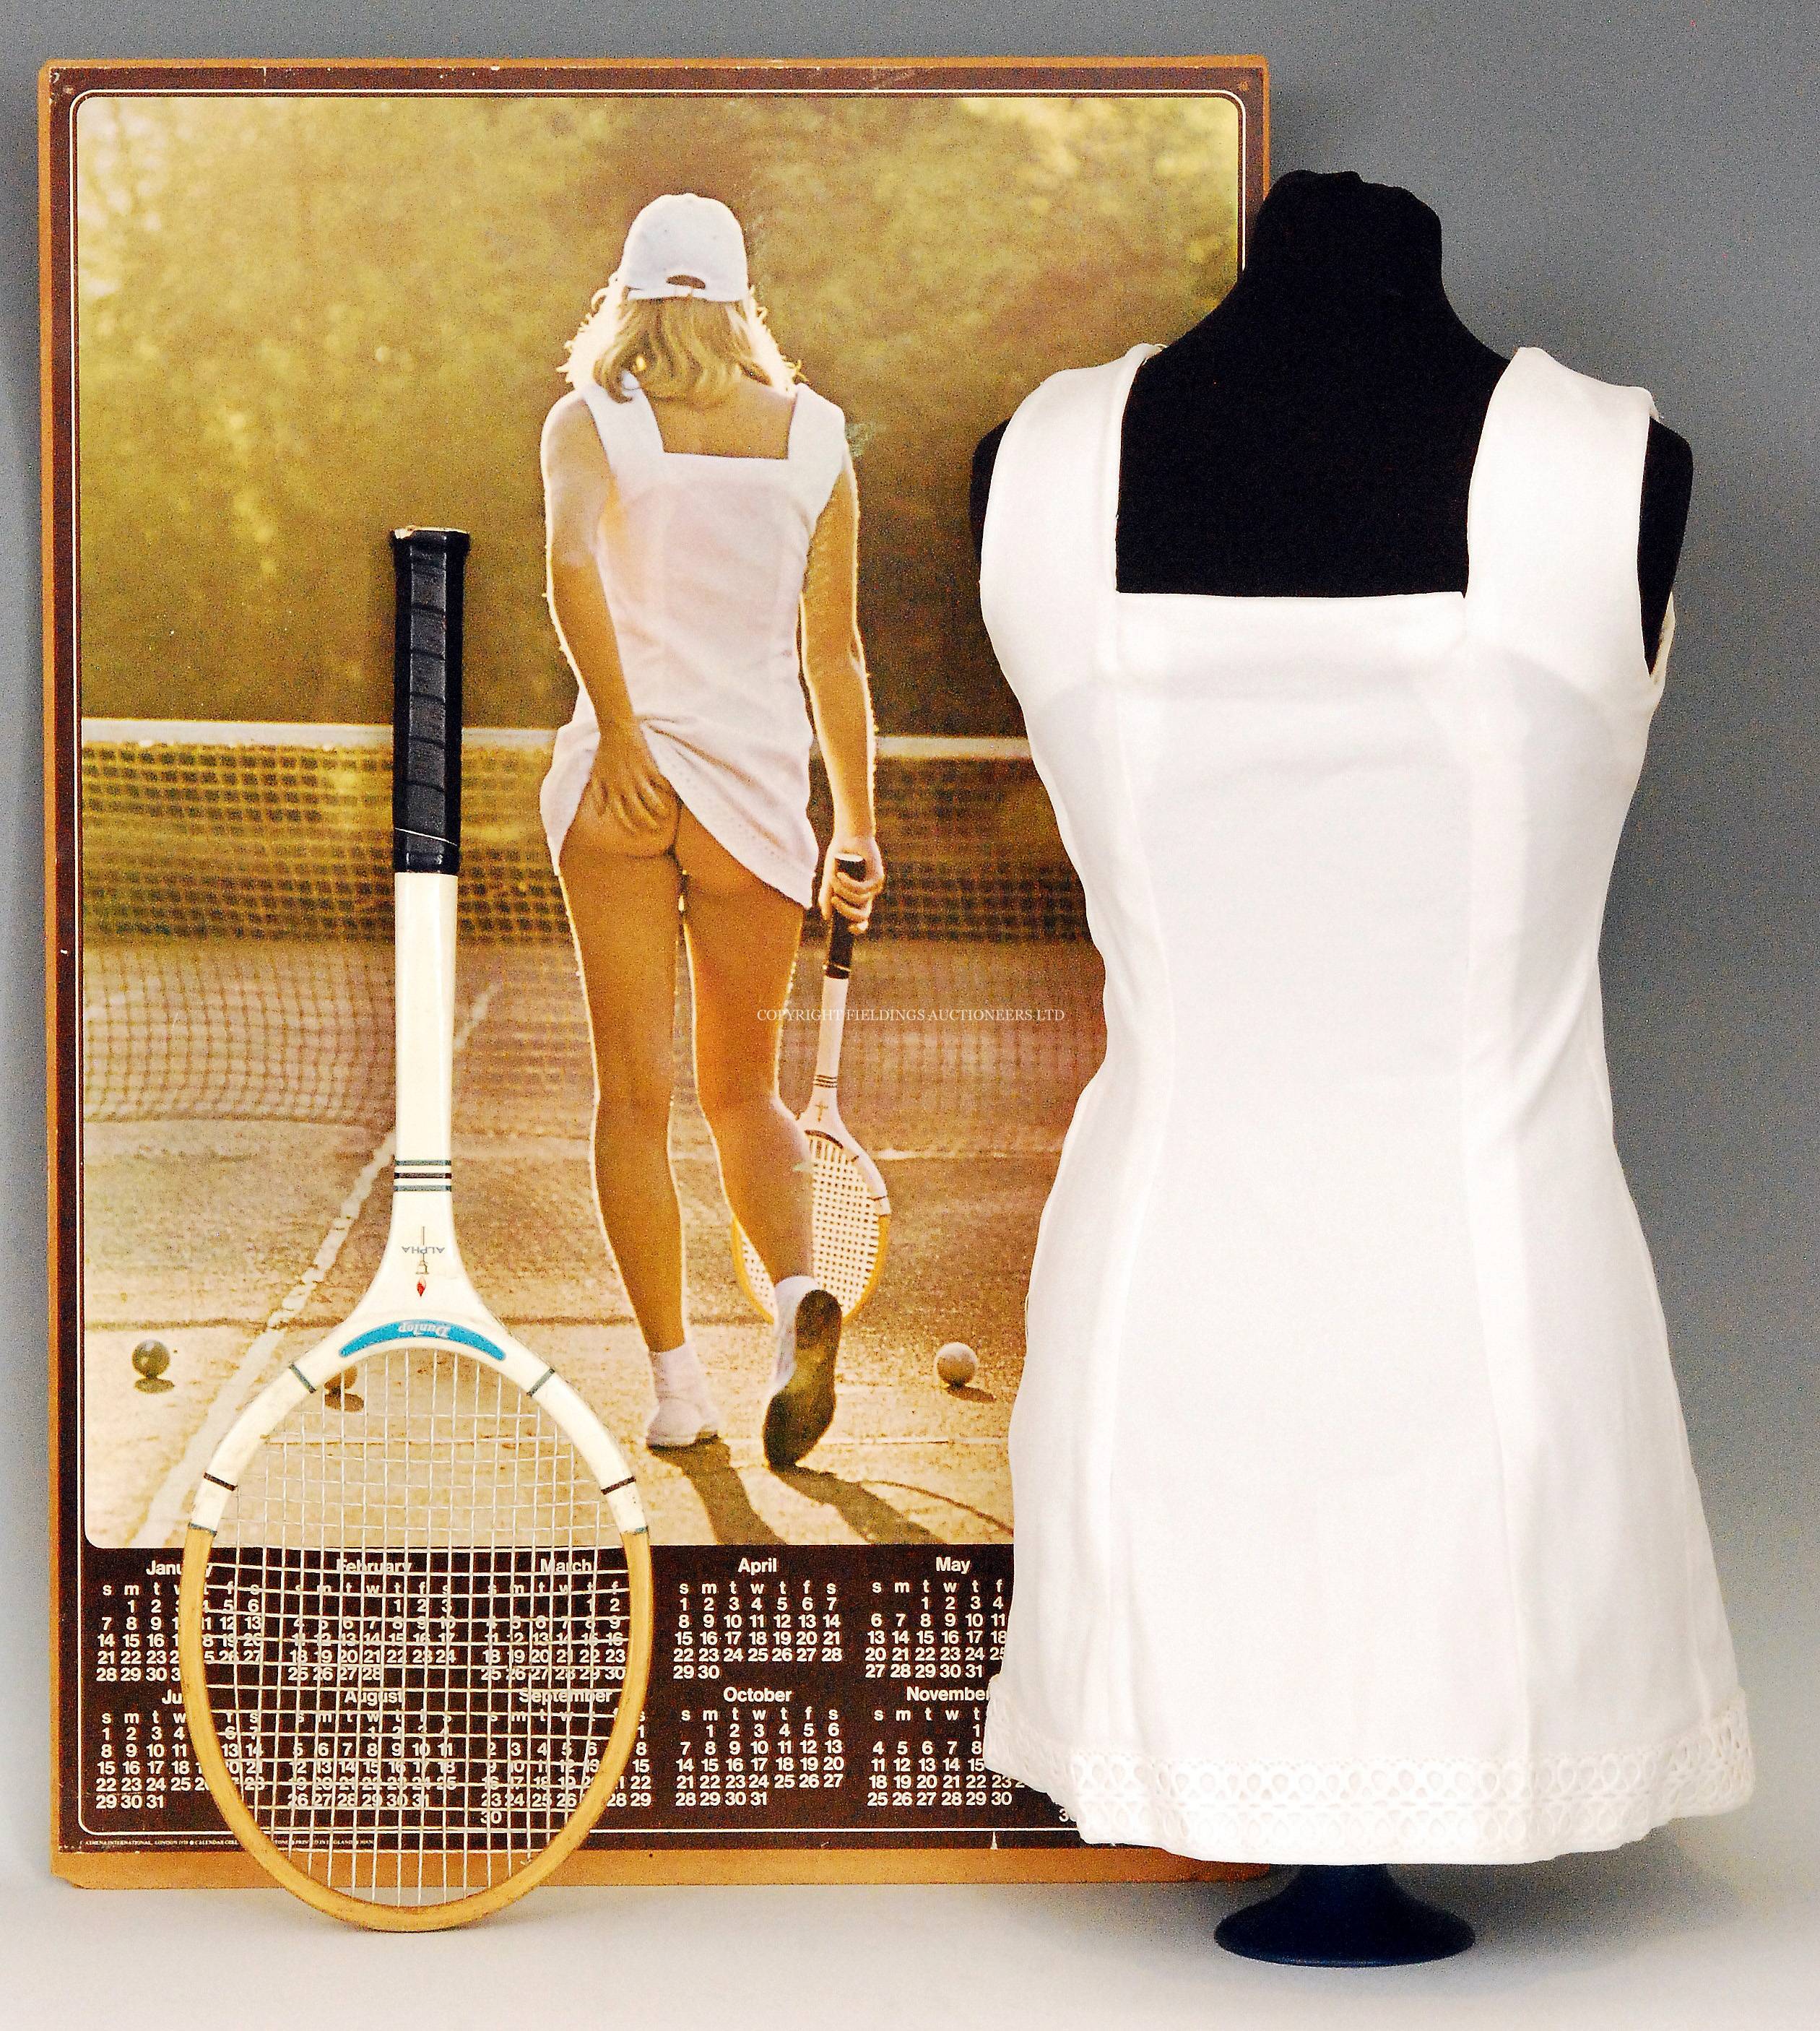 The dress in the iconic 'Tennis Girl' poster is going up for auction